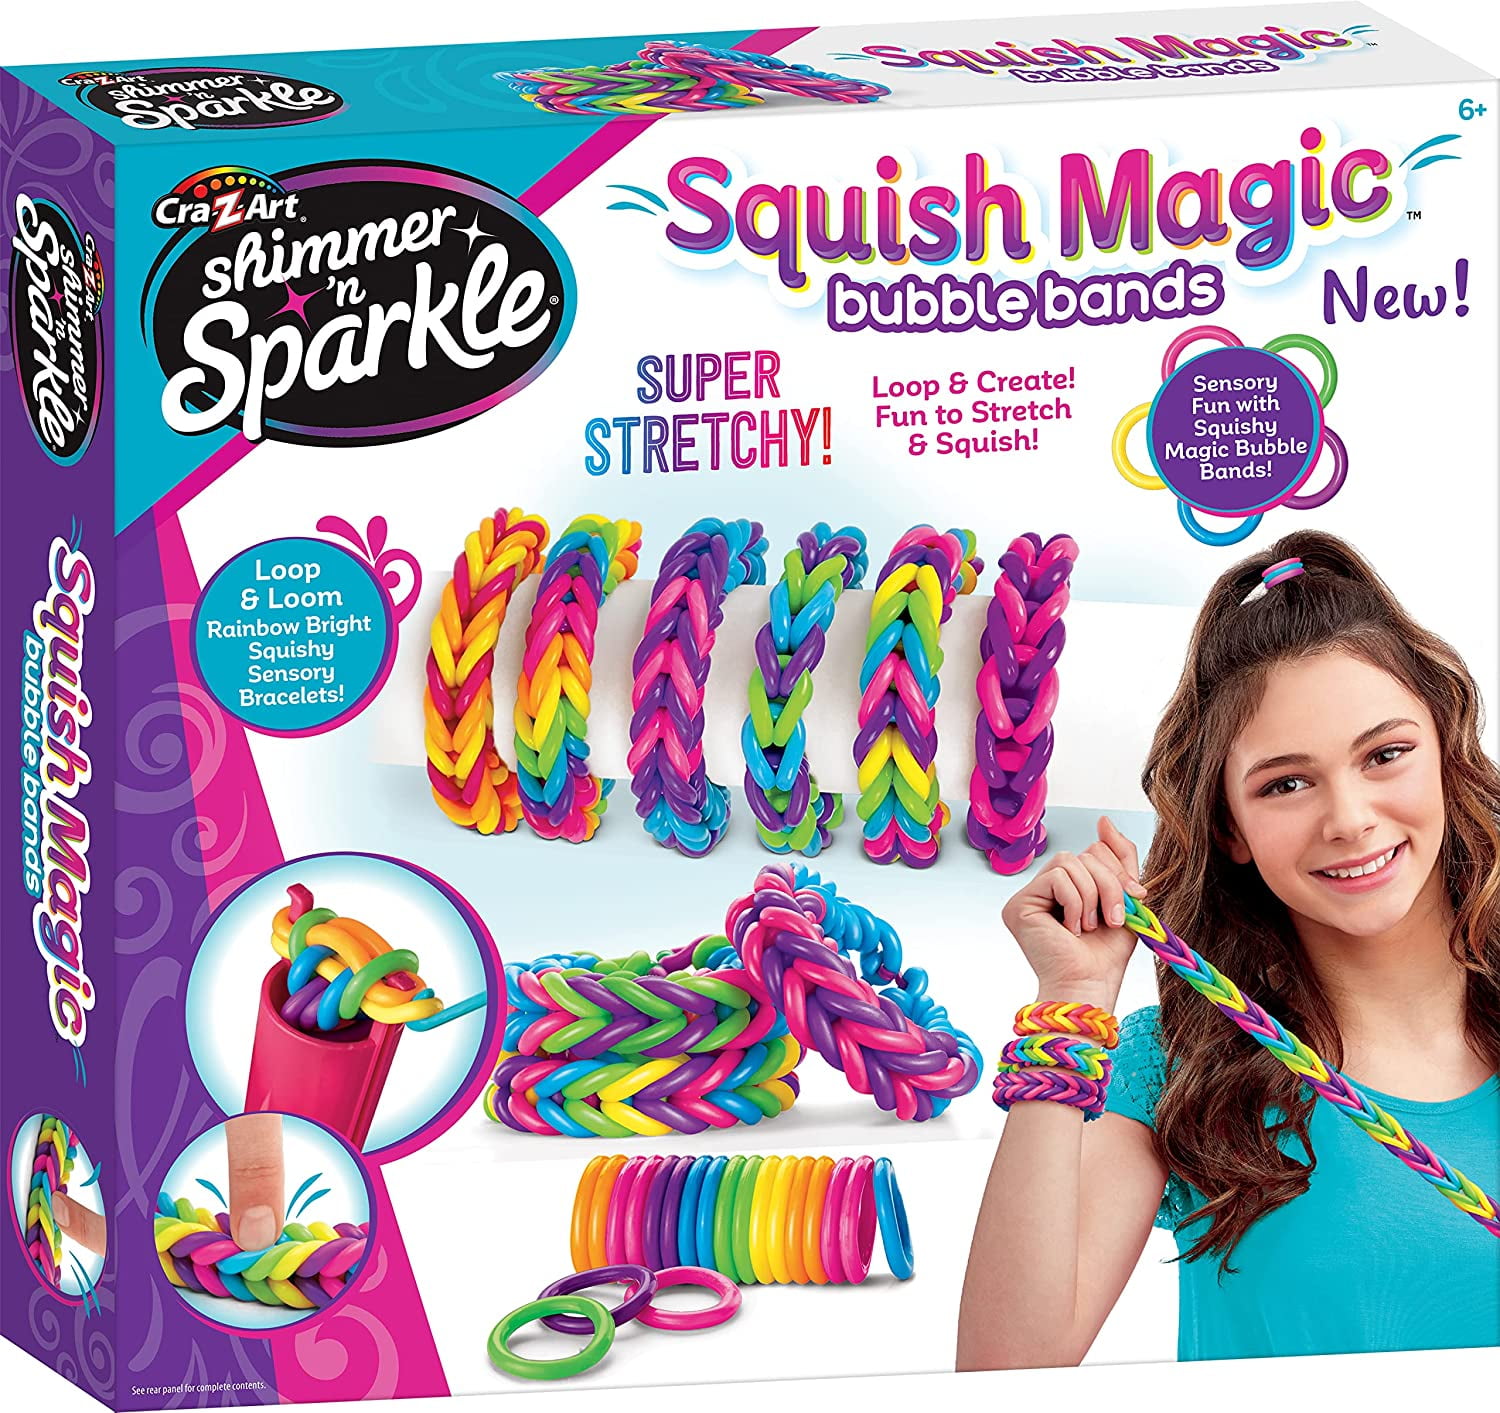 Free: Cra-Z-Loom Shimmer N Sparkle Rainbow Bracelet Maker Makes 24 With 600 Rubber  Bands - Other Craft Items -  Auctions for Free Stuff